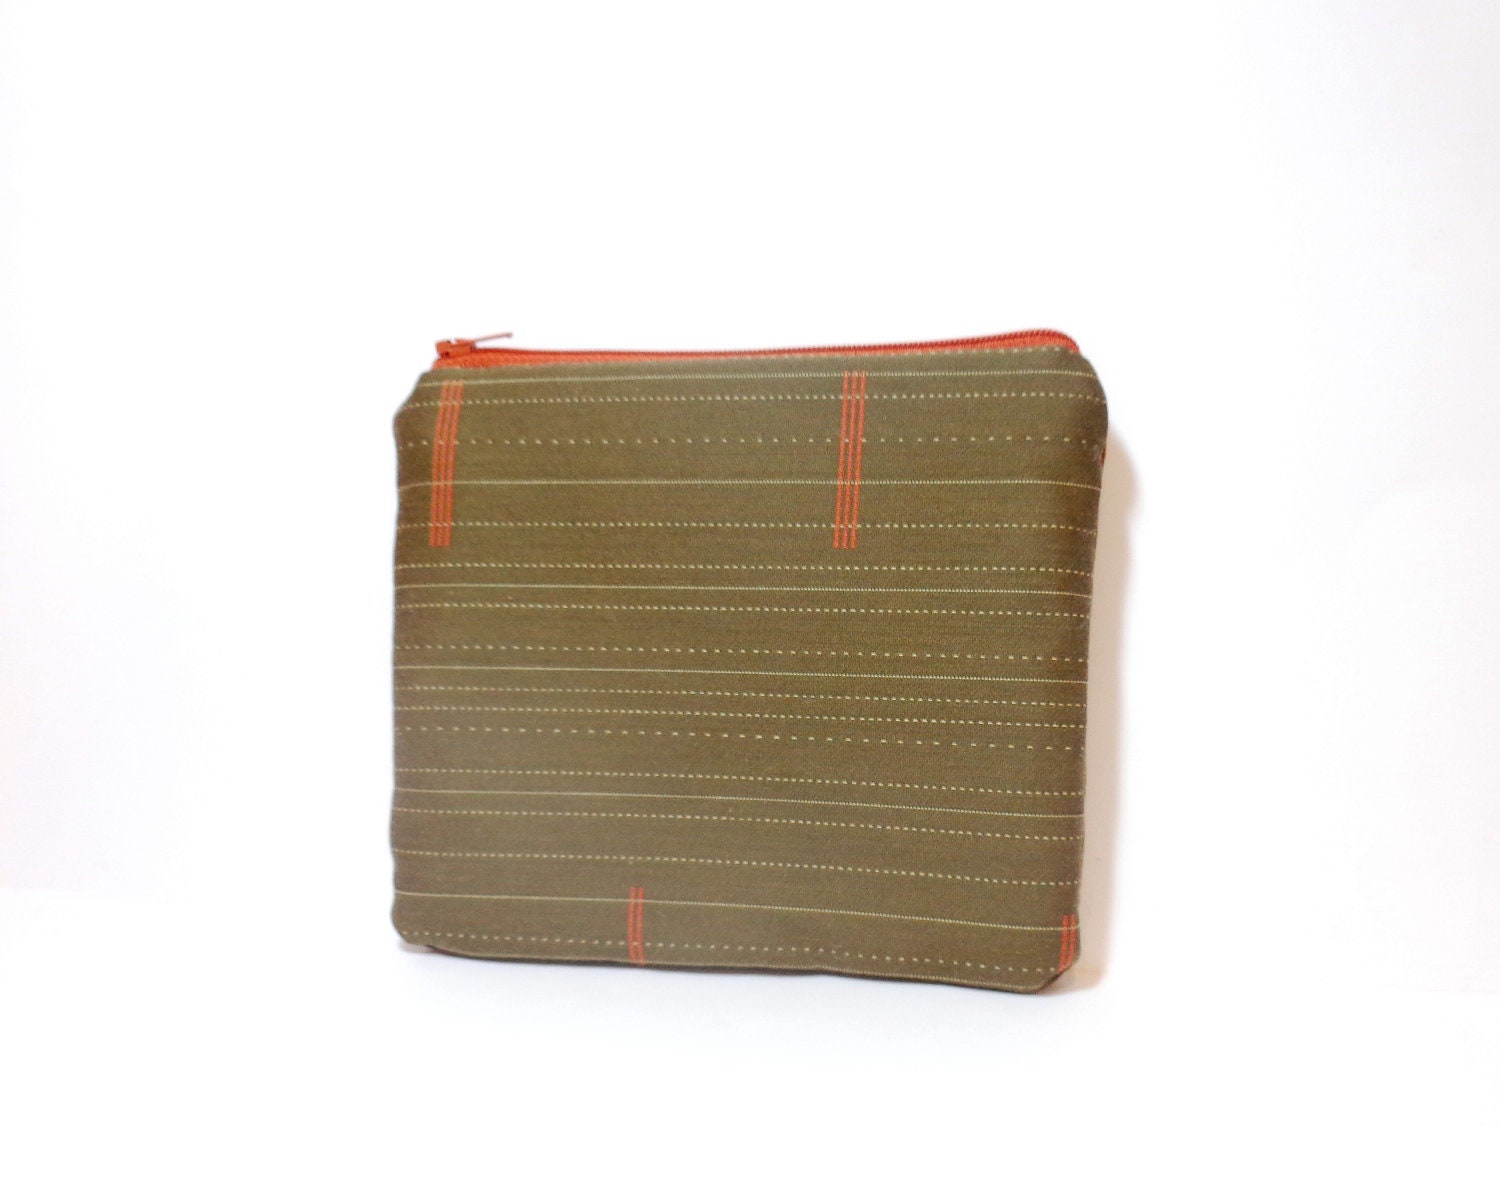 Medium Pouch Zipper Pouch Cosmetic Bag  Gadget Pouch Olive with Rust - handjstarcreations